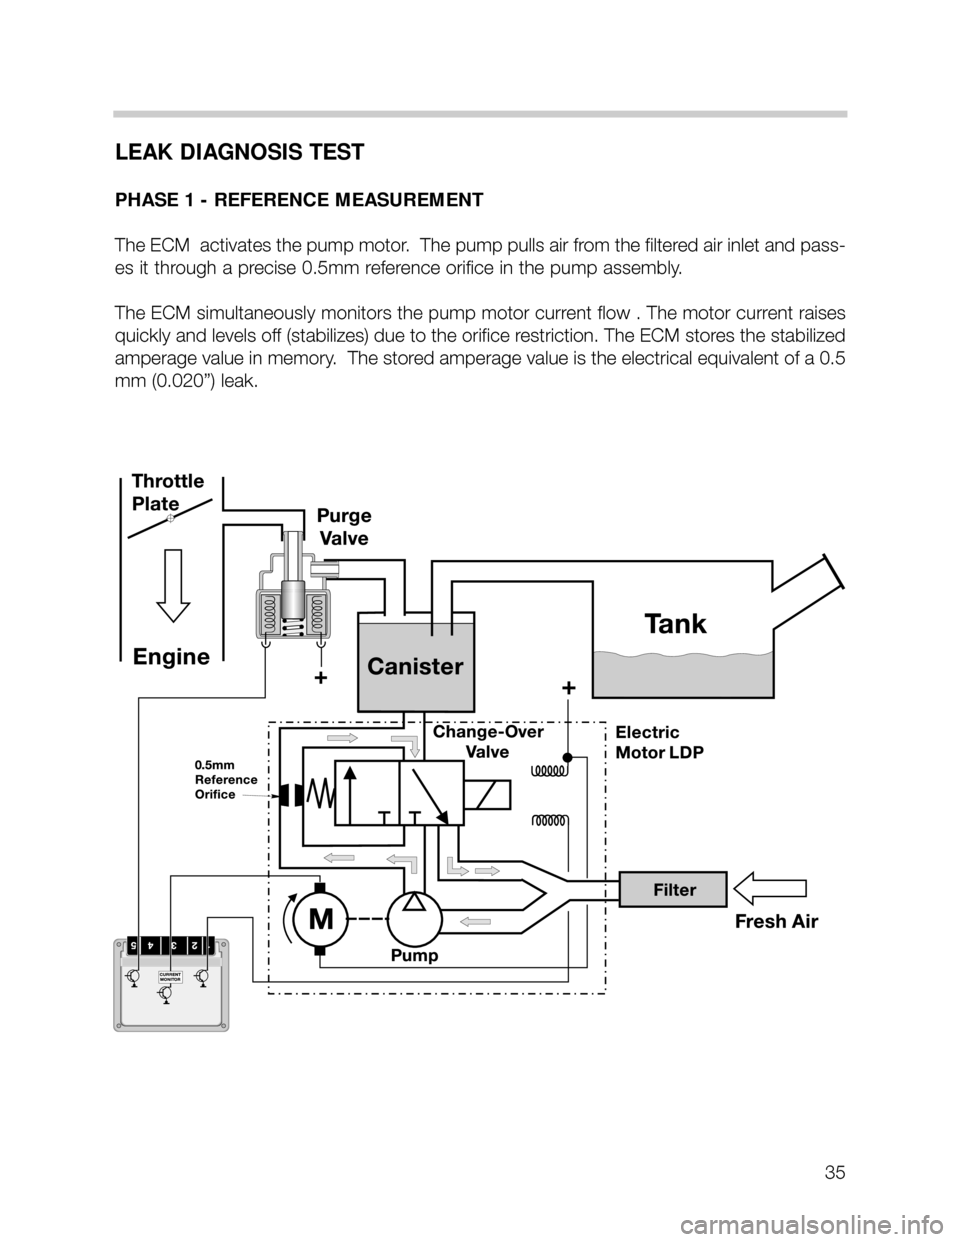 BMW 535i 2001 E39 M62TU Engine Owners Guide LEAK DIAGNOSIS TEST
PHASE 1 - REFERENCE MEASUREMENT
The ECM  activates the pump motor.  The pump pulls air from the filtered air inlet and pass-
es it through a precise 0.5mm reference orifice in the 